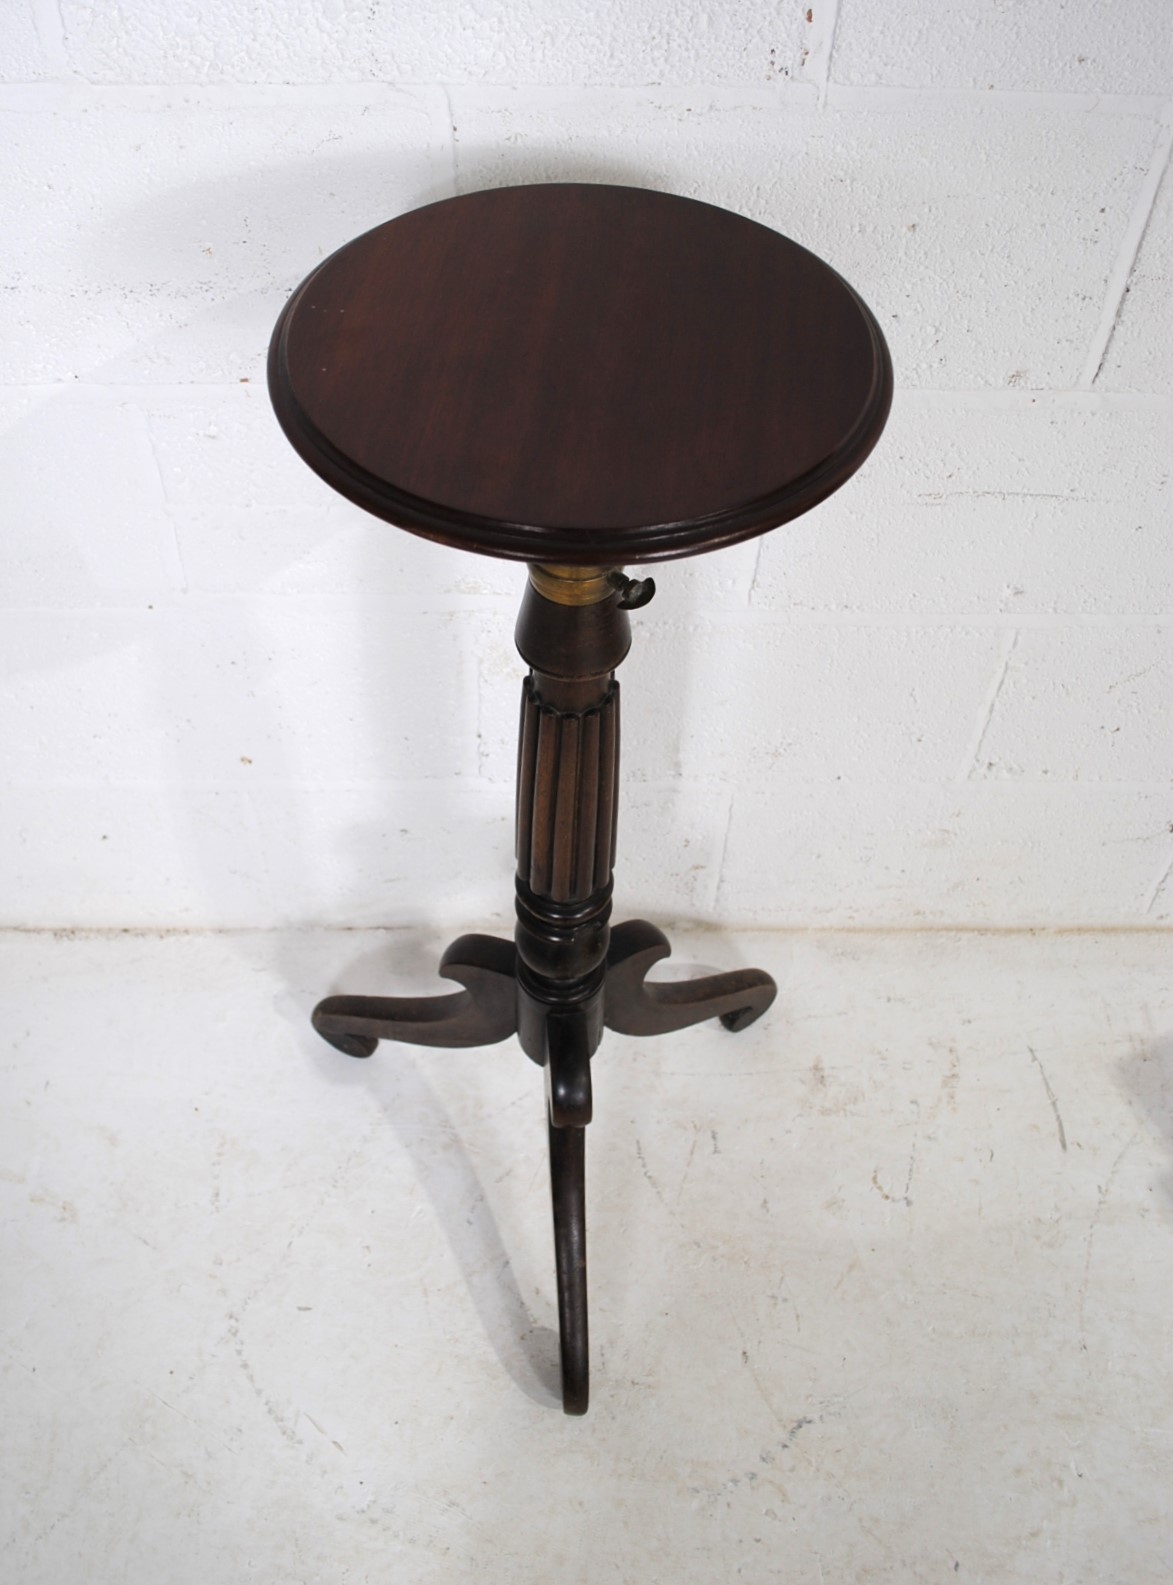 An antique mahogany adjustable plant stand - Image 4 of 4